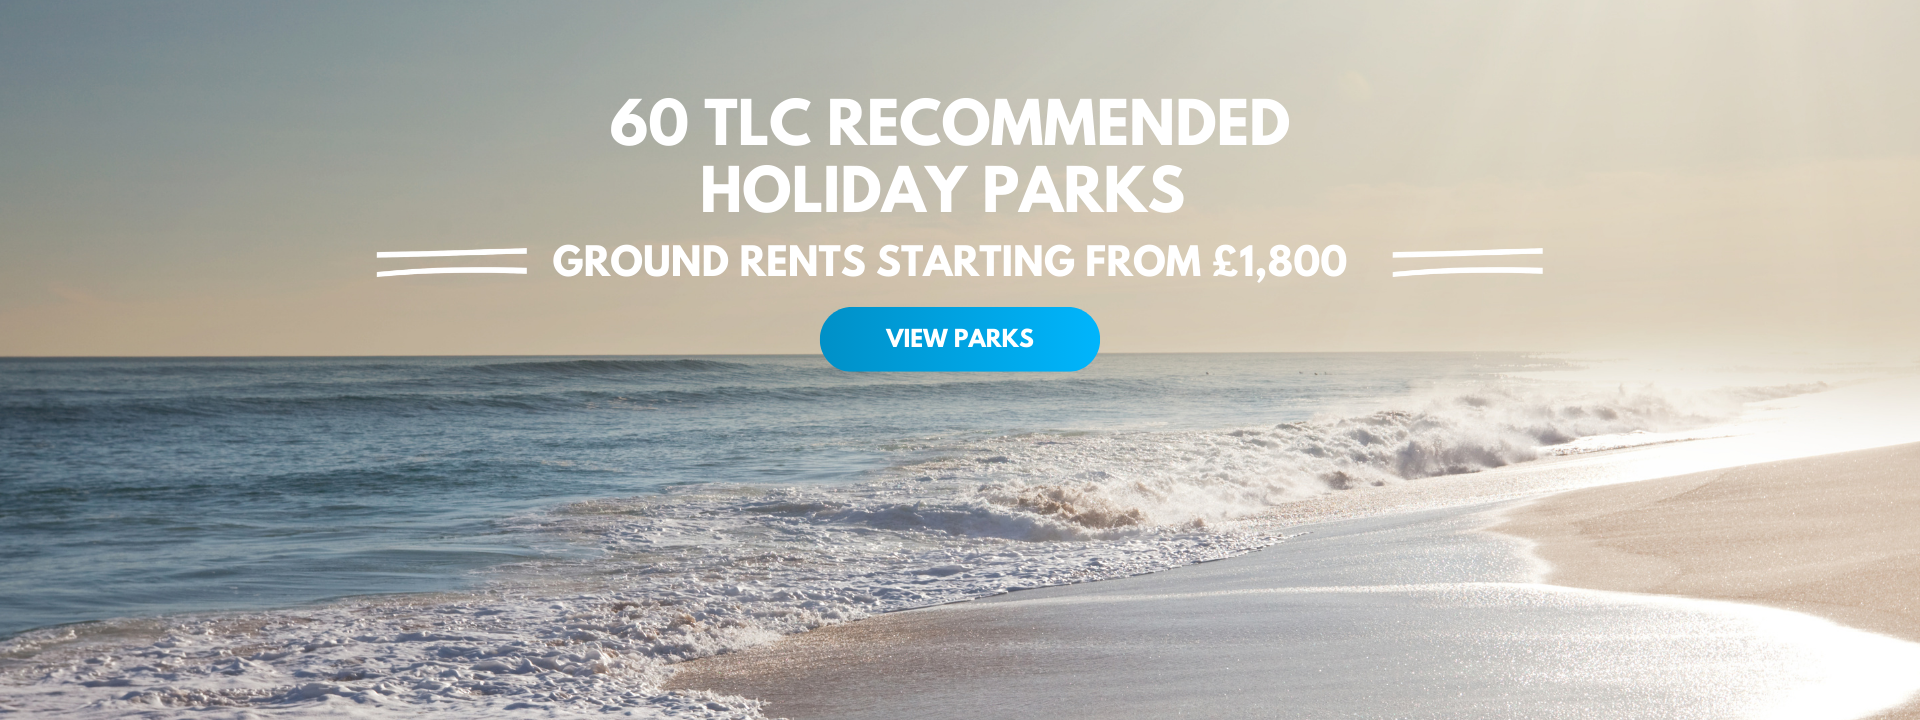 60 TLC Recommened Holiday Parks